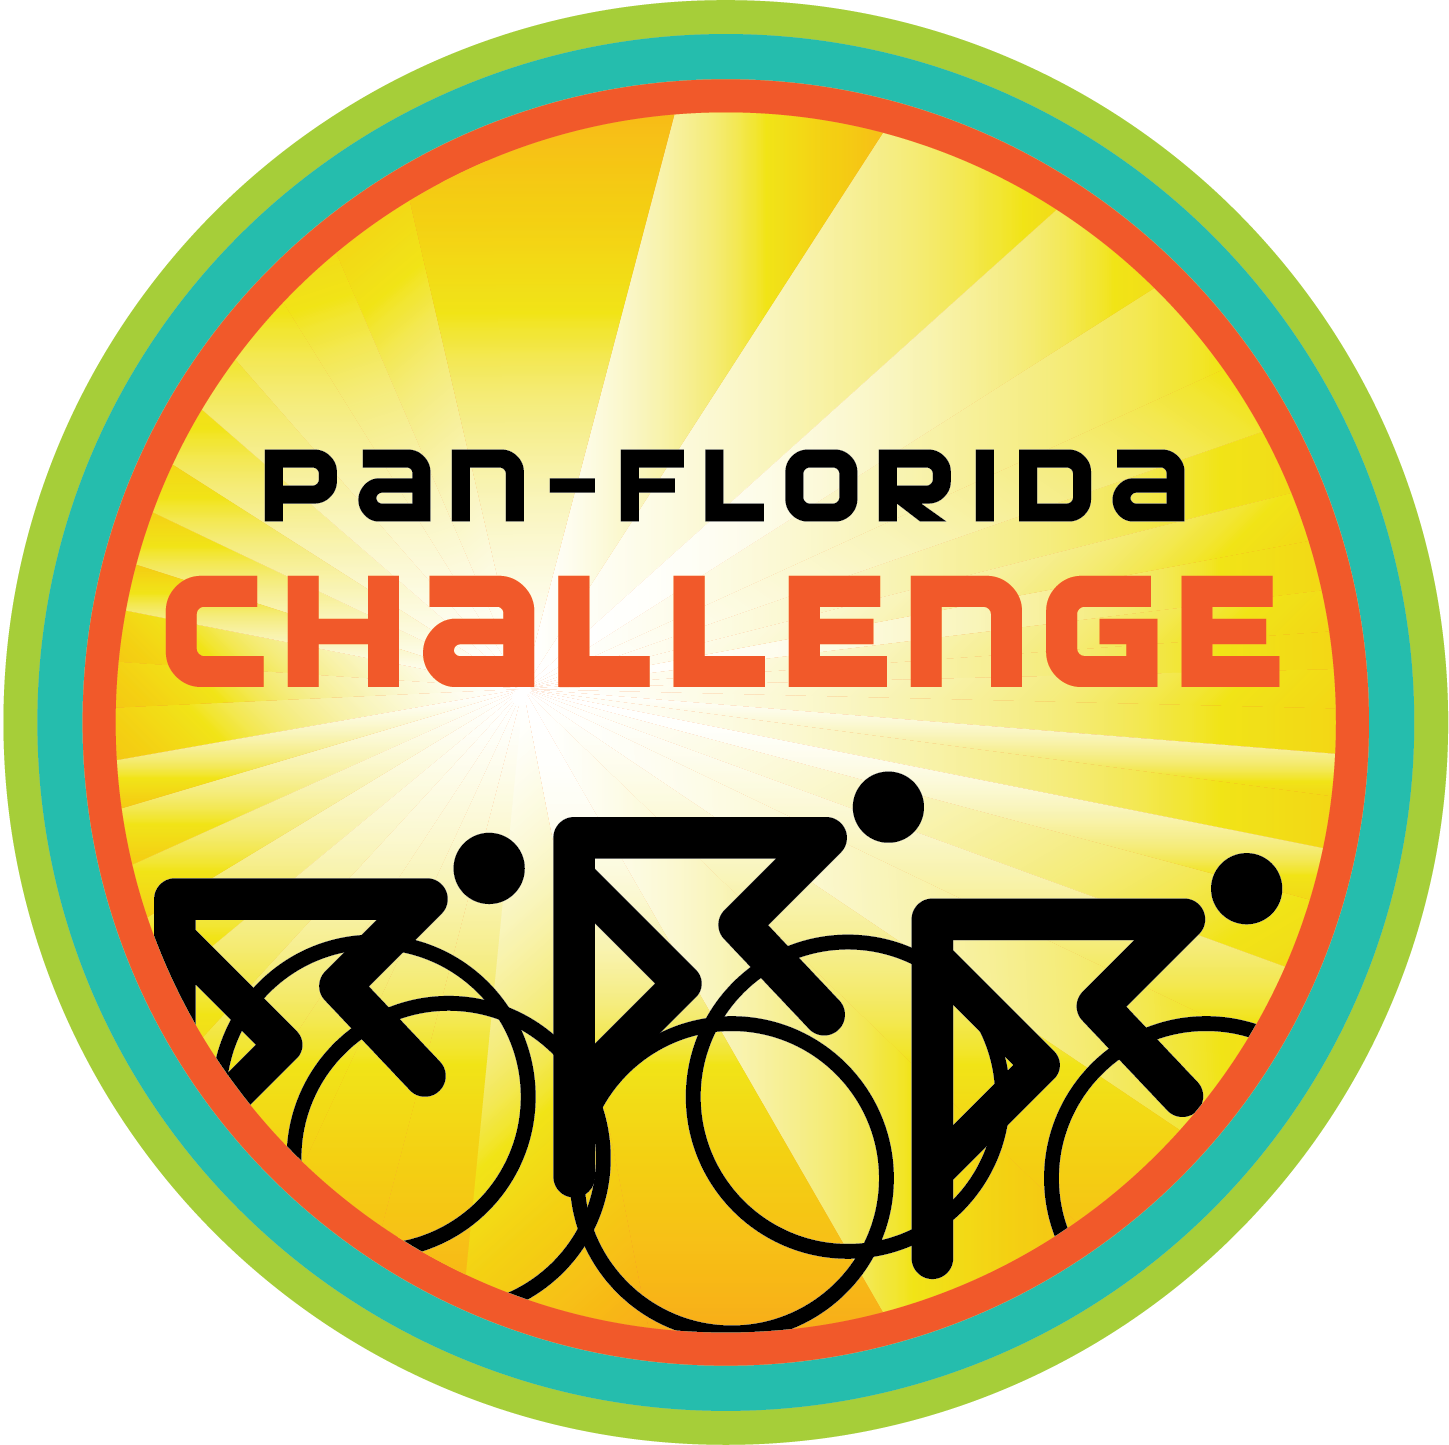 Pan-Florida Challenge Cancer Ride set for this Sunday